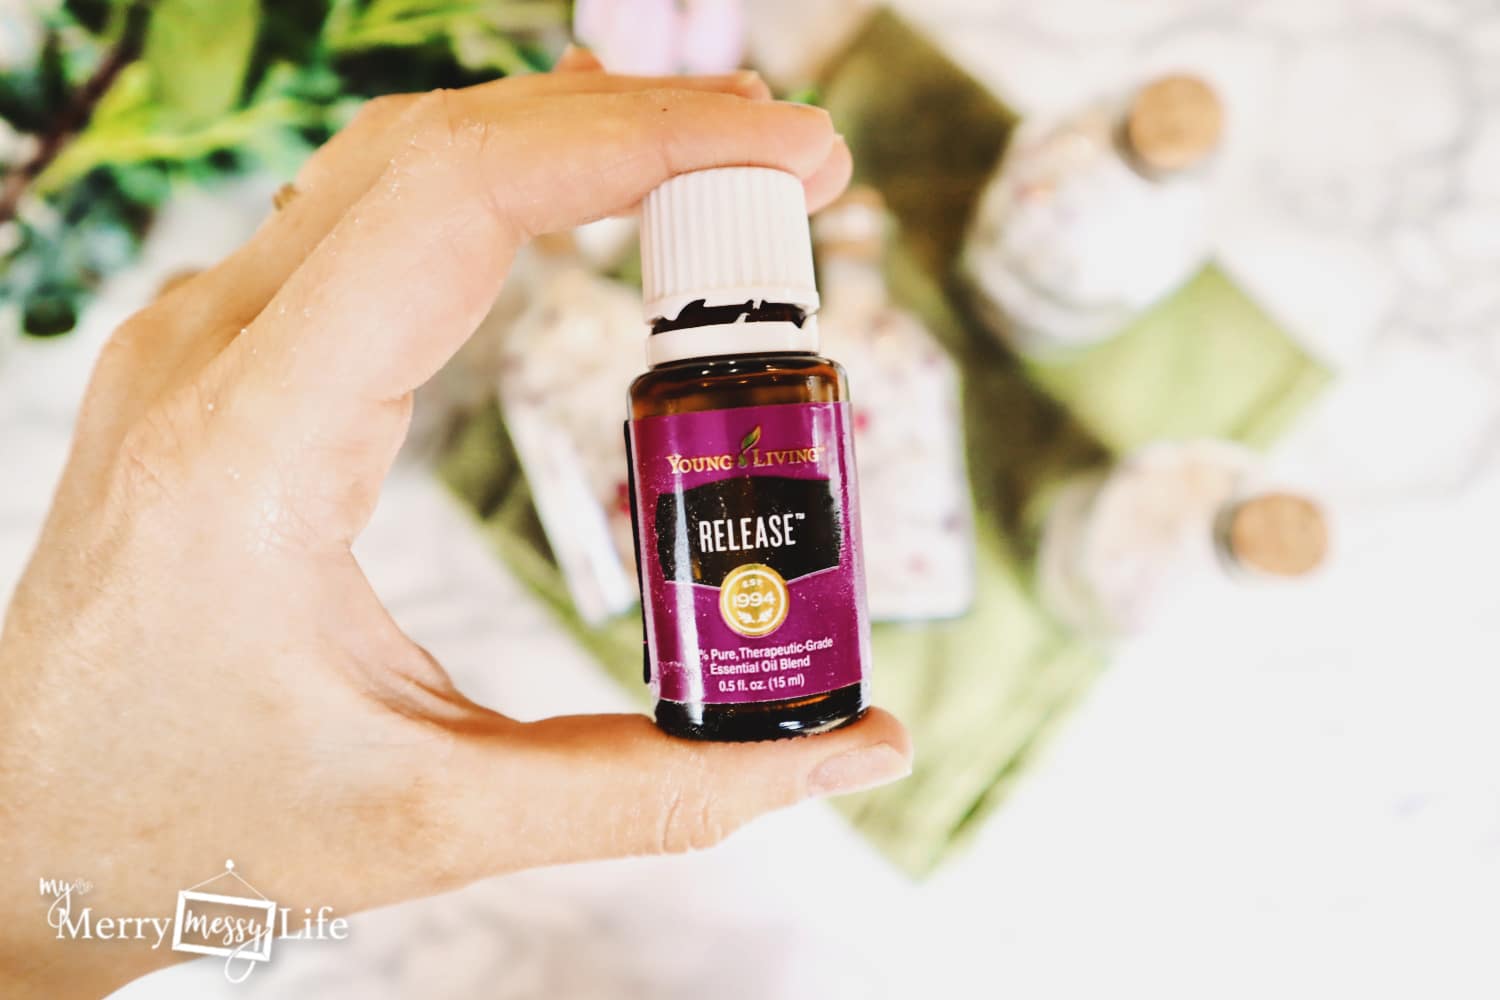 Release Essential Oil from Young Living